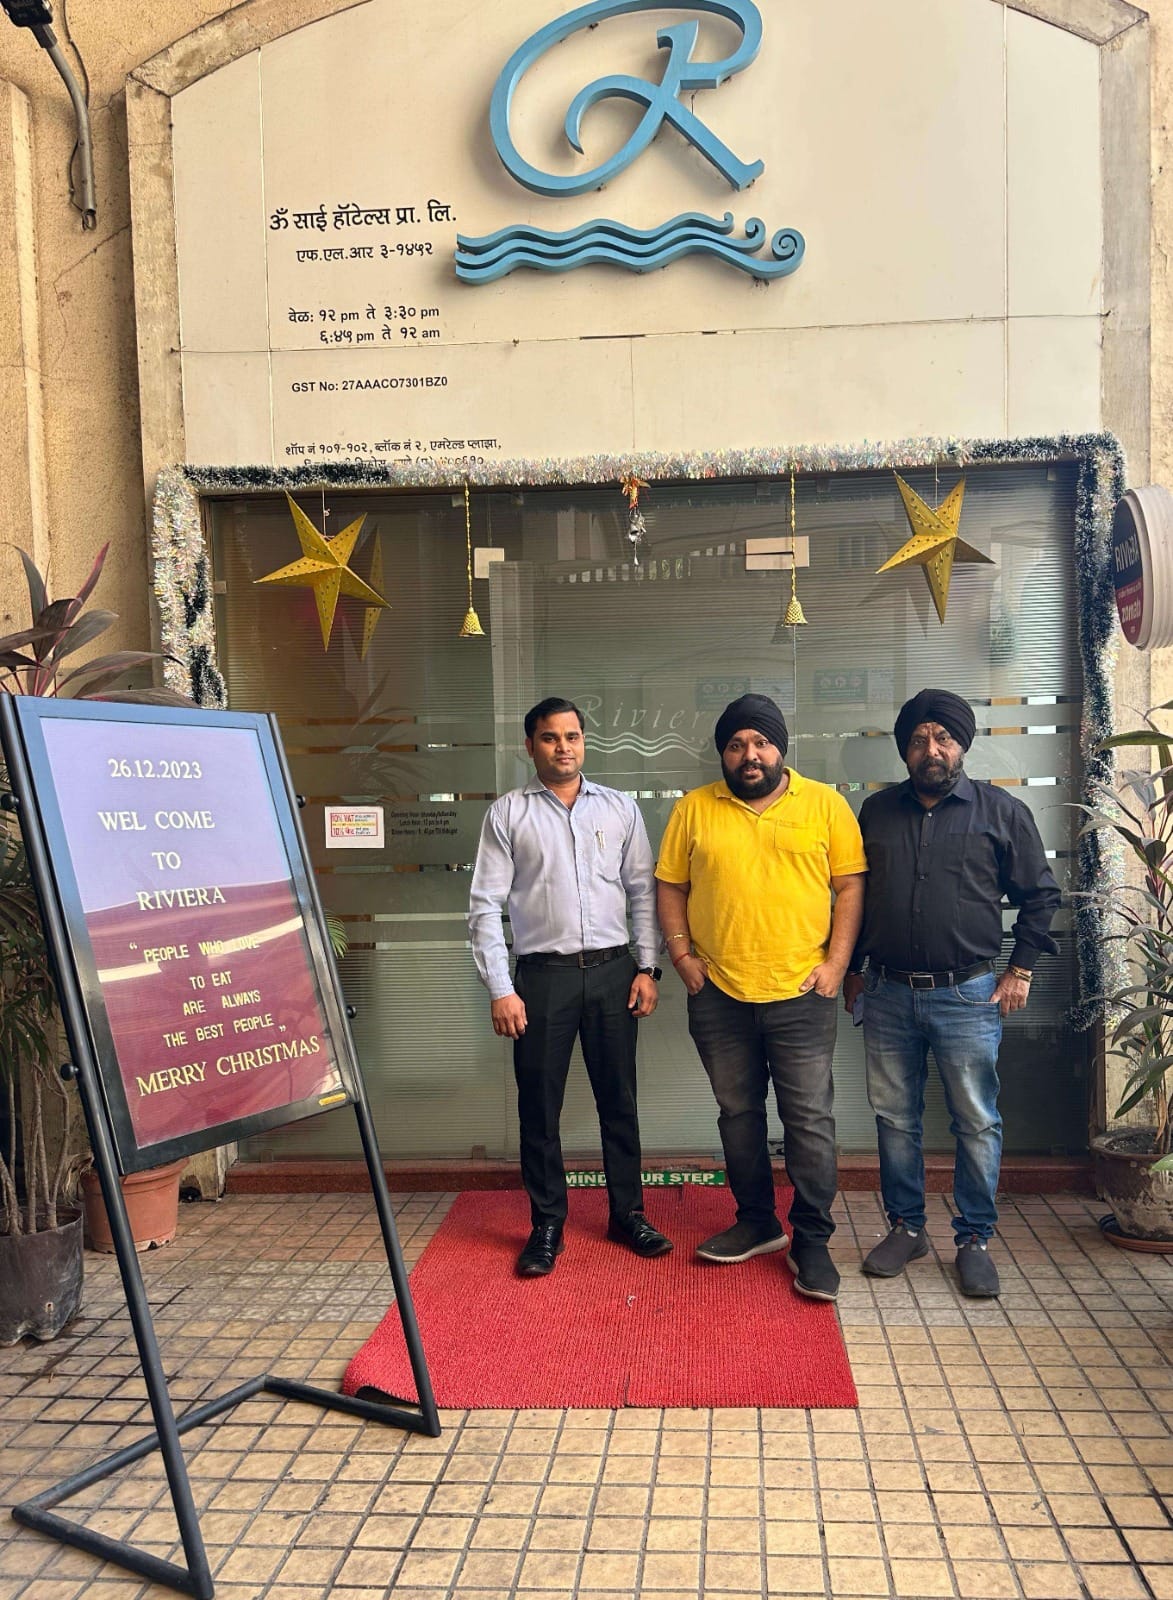 Rivieria Restaurant in Thane’s Vasant Vihar Wins Hearts with Signature Dishes, Applauded by Renowned Blogger Randeep Gujral from Turbanmirchie and FDCWC General Secretary